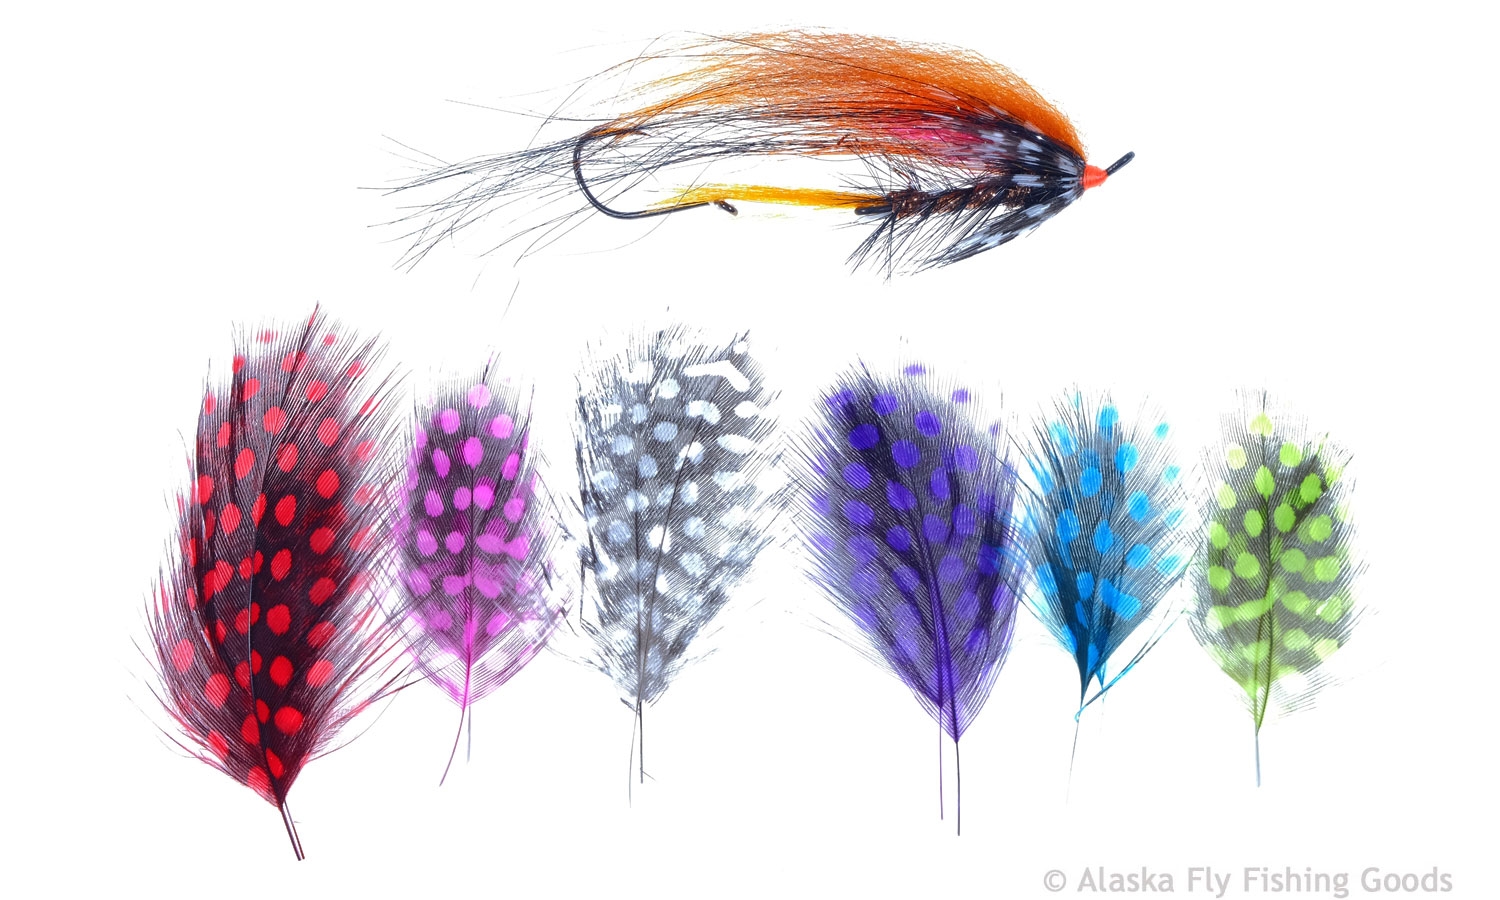 Rooster hackle dry fly cape fly fishing feathers wide range sizes